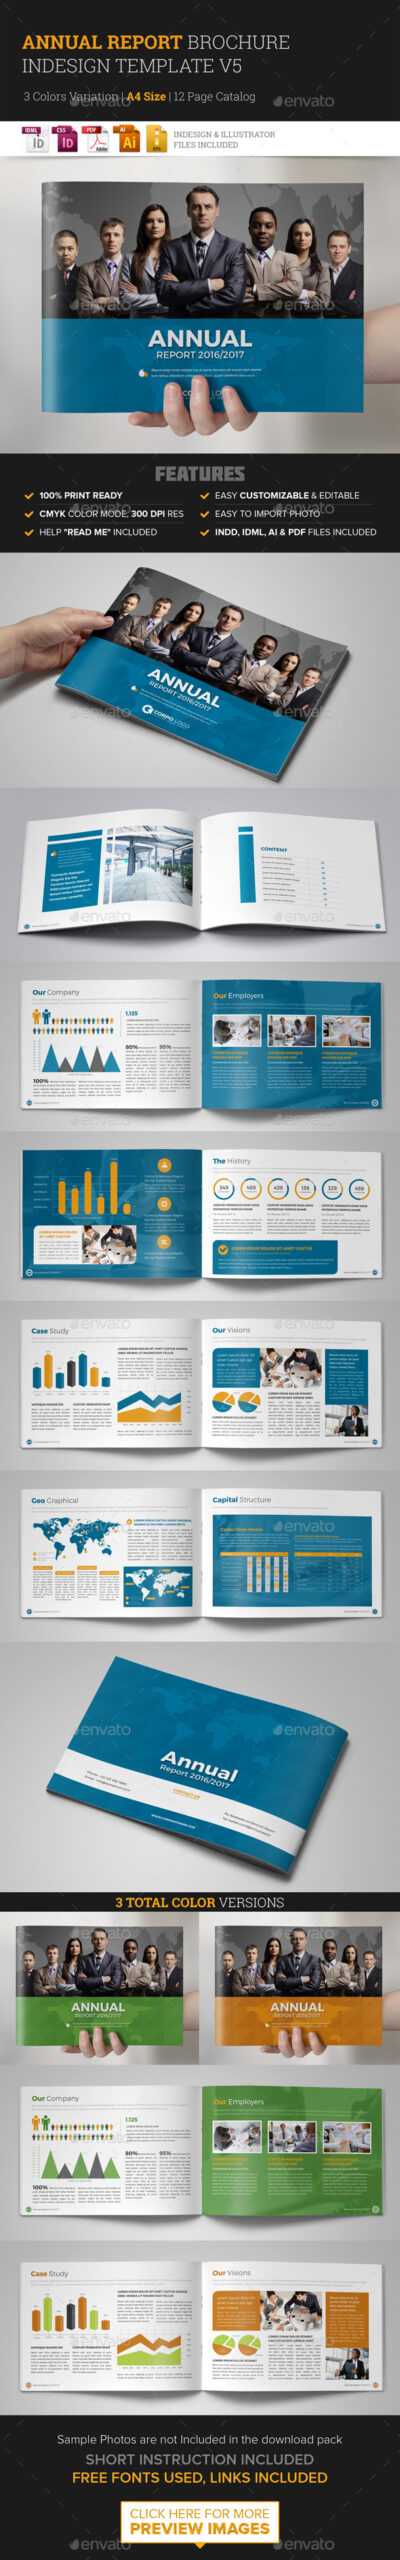 Annual Report Template Indesign Graphics, Designs & Templates For Illustrator Report Templates